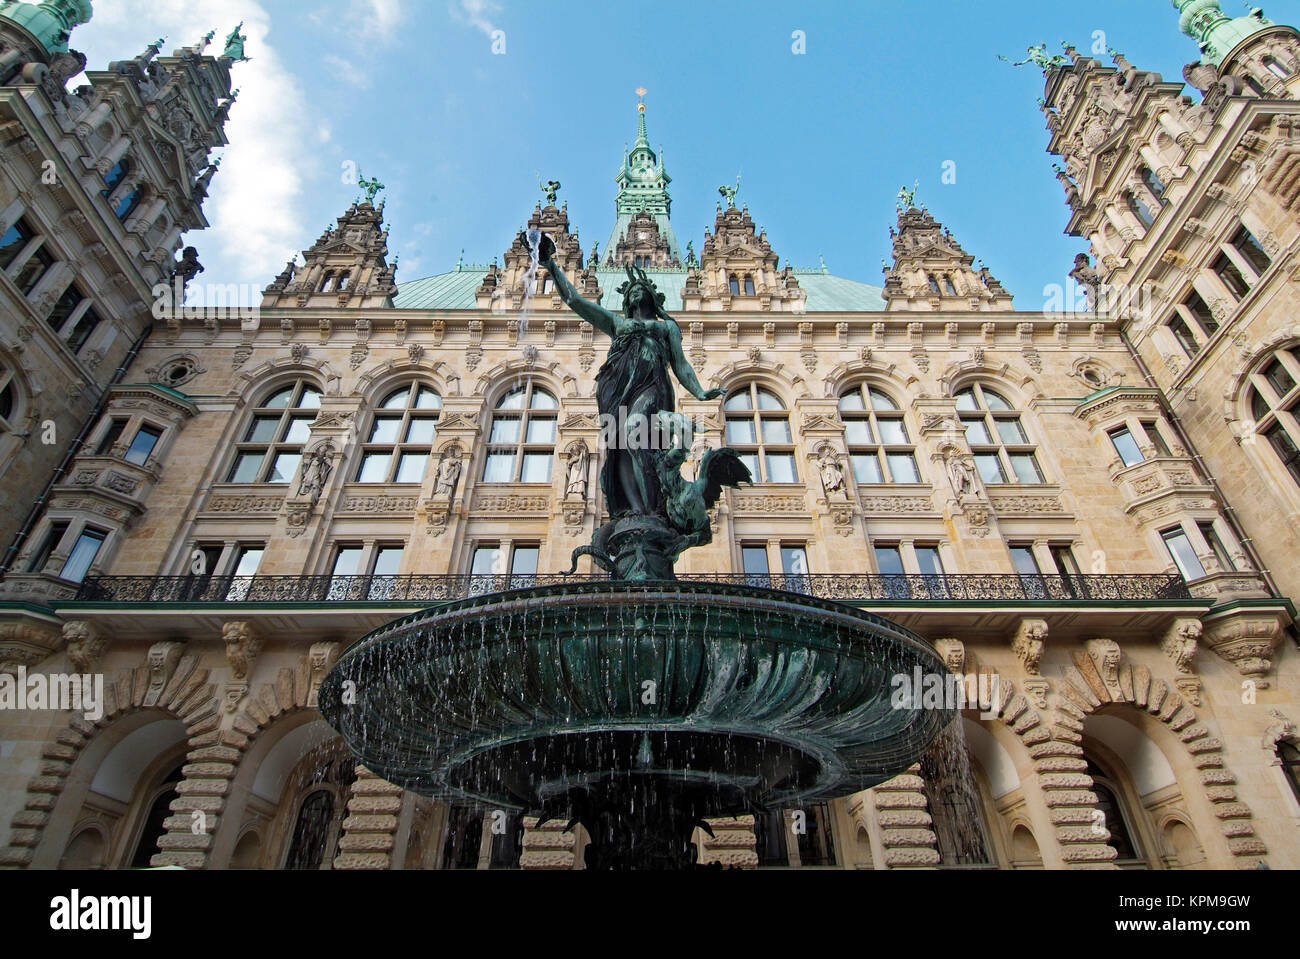 Hamburg, one of the most beautiful and most popular tourist destinations The historic Hygieia Fountain in the inner courtyard of the townhall Hamburgs Stock Photo